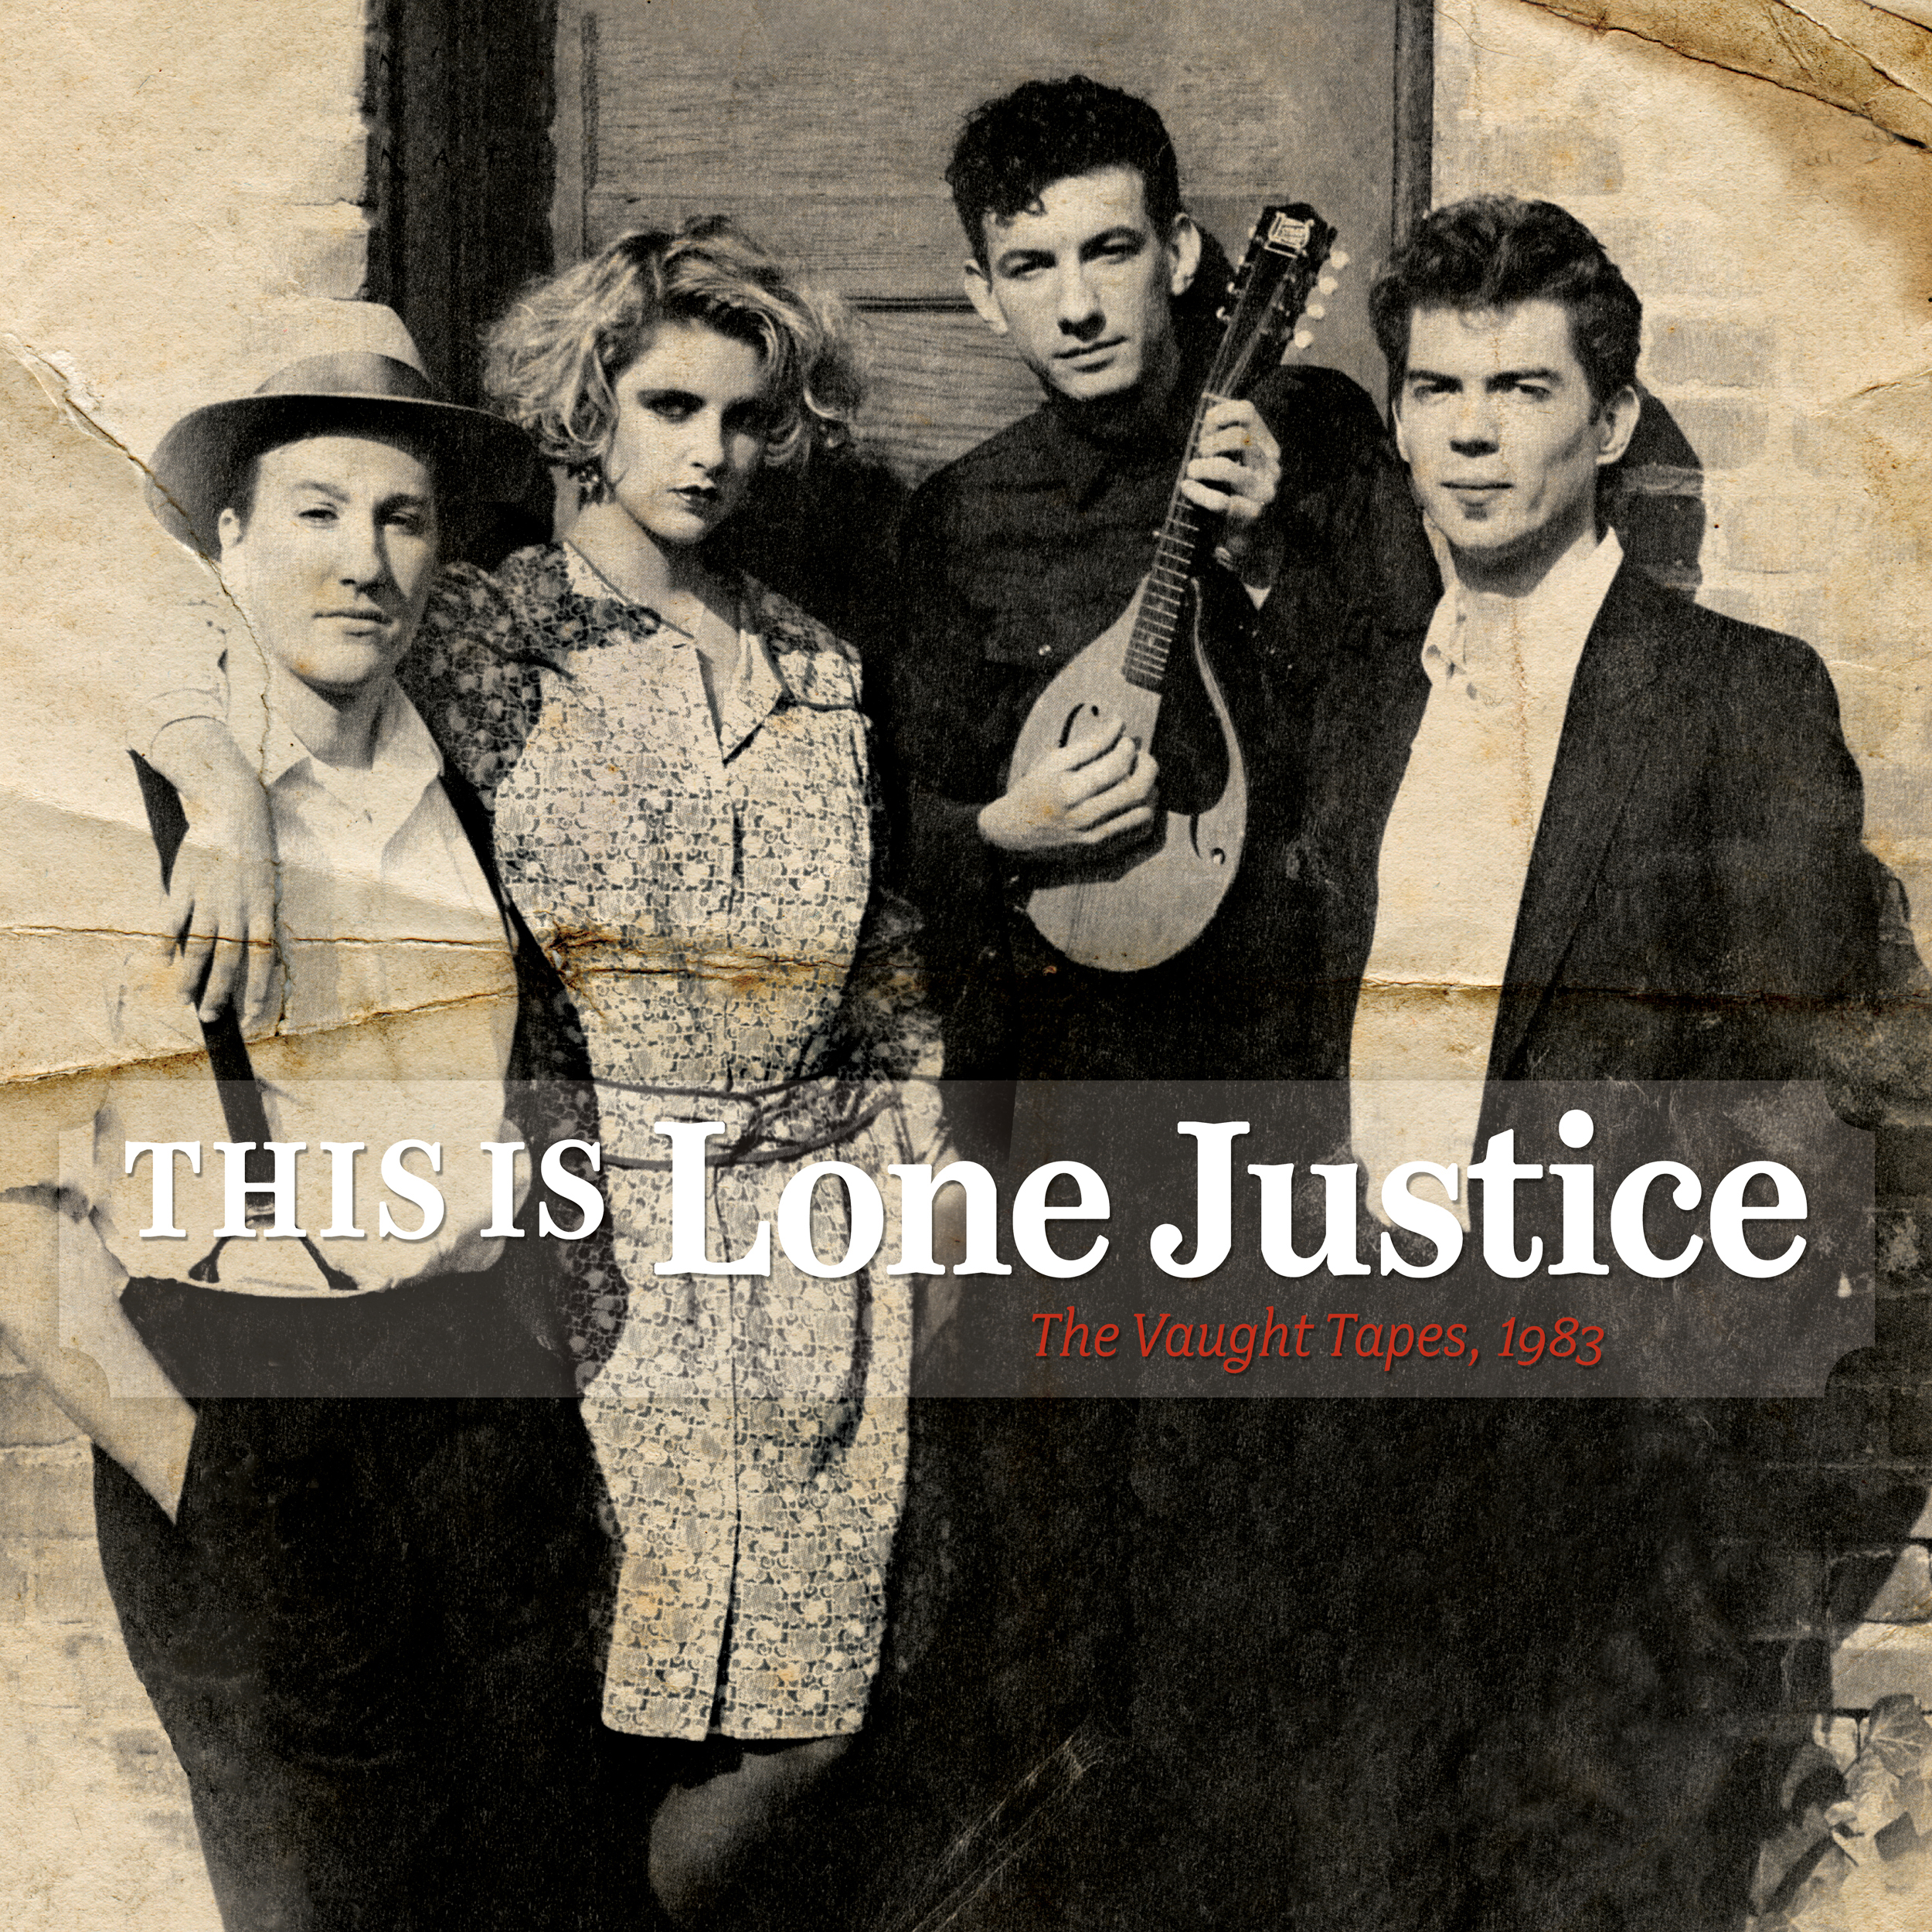 Lone Justice: This Is Lone Justice: The Vaught Tapes, 1983